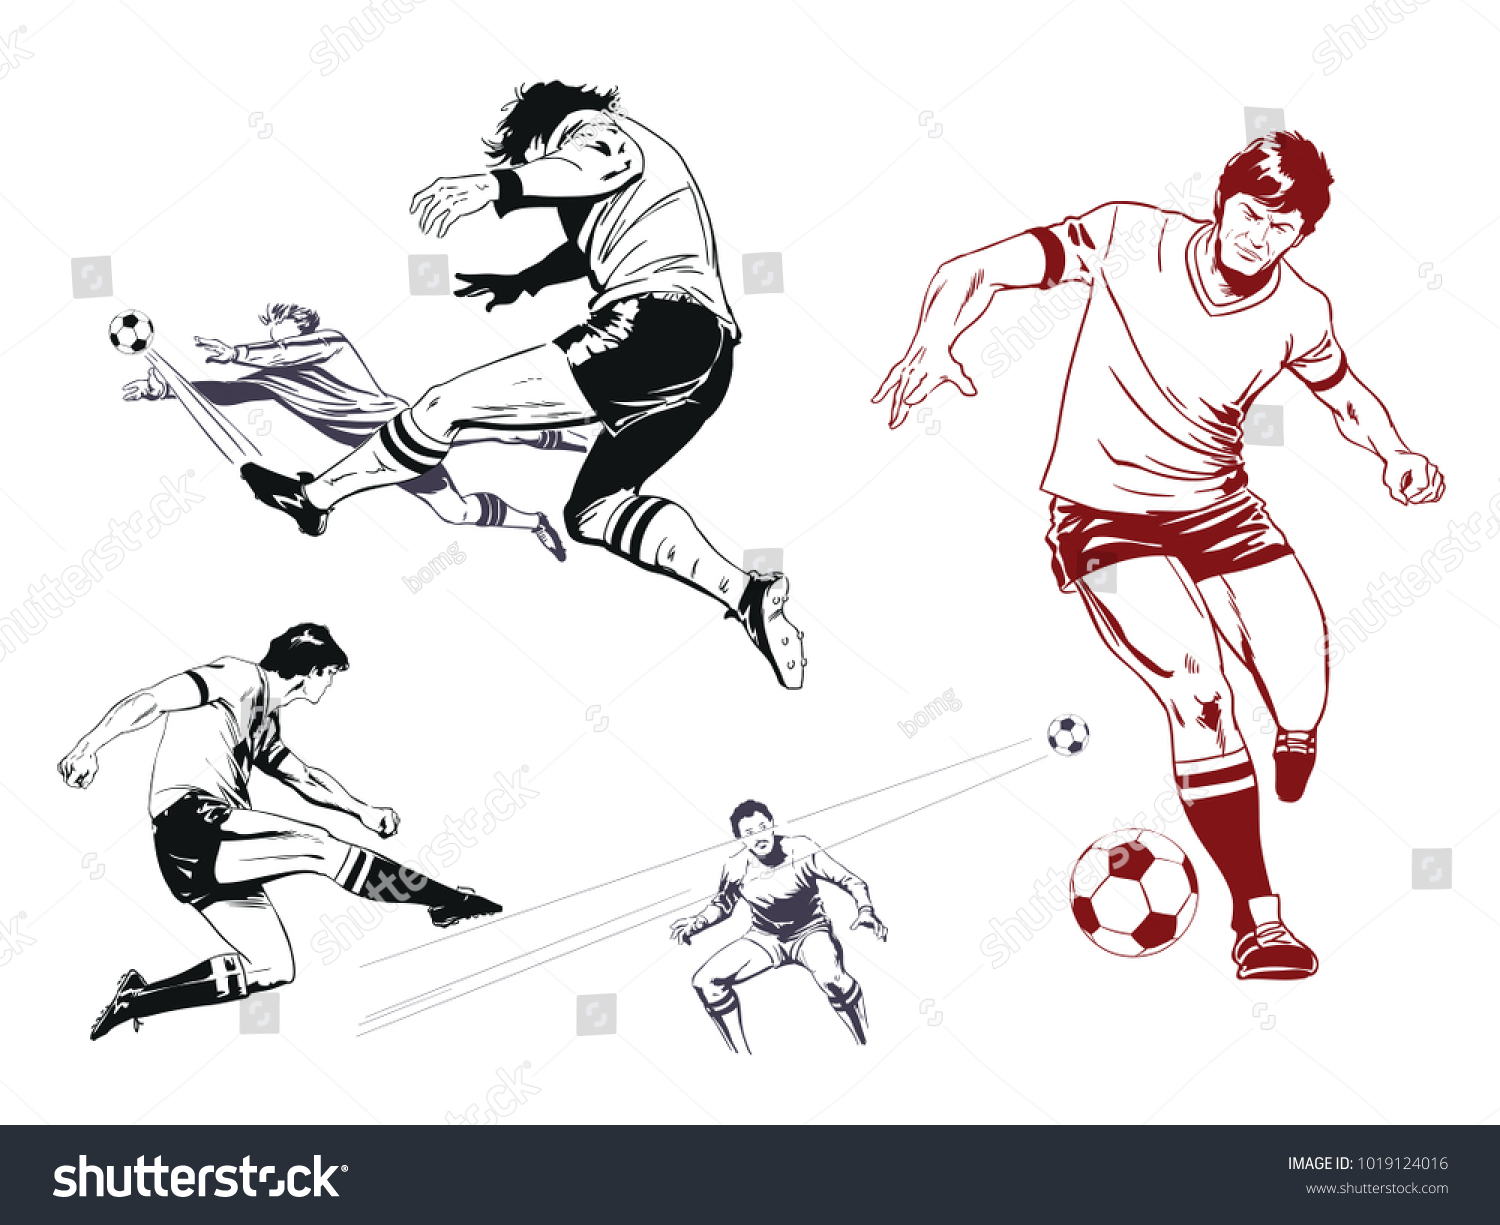 10,547 Retro soccer players Images, Stock Photos & Vectors | Shutterstock